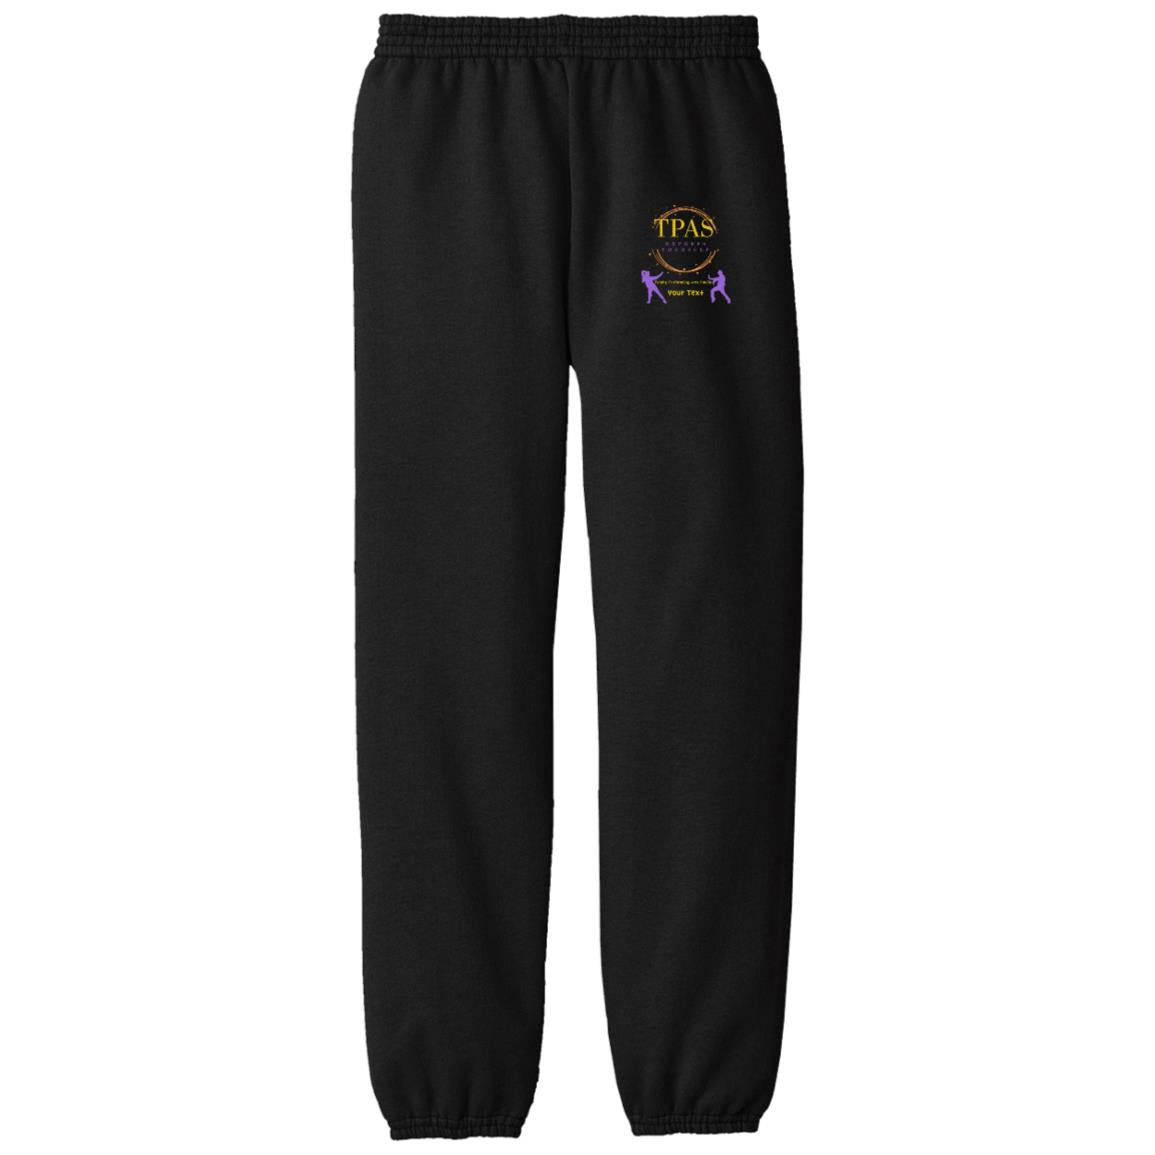 TPAS Youth Pants